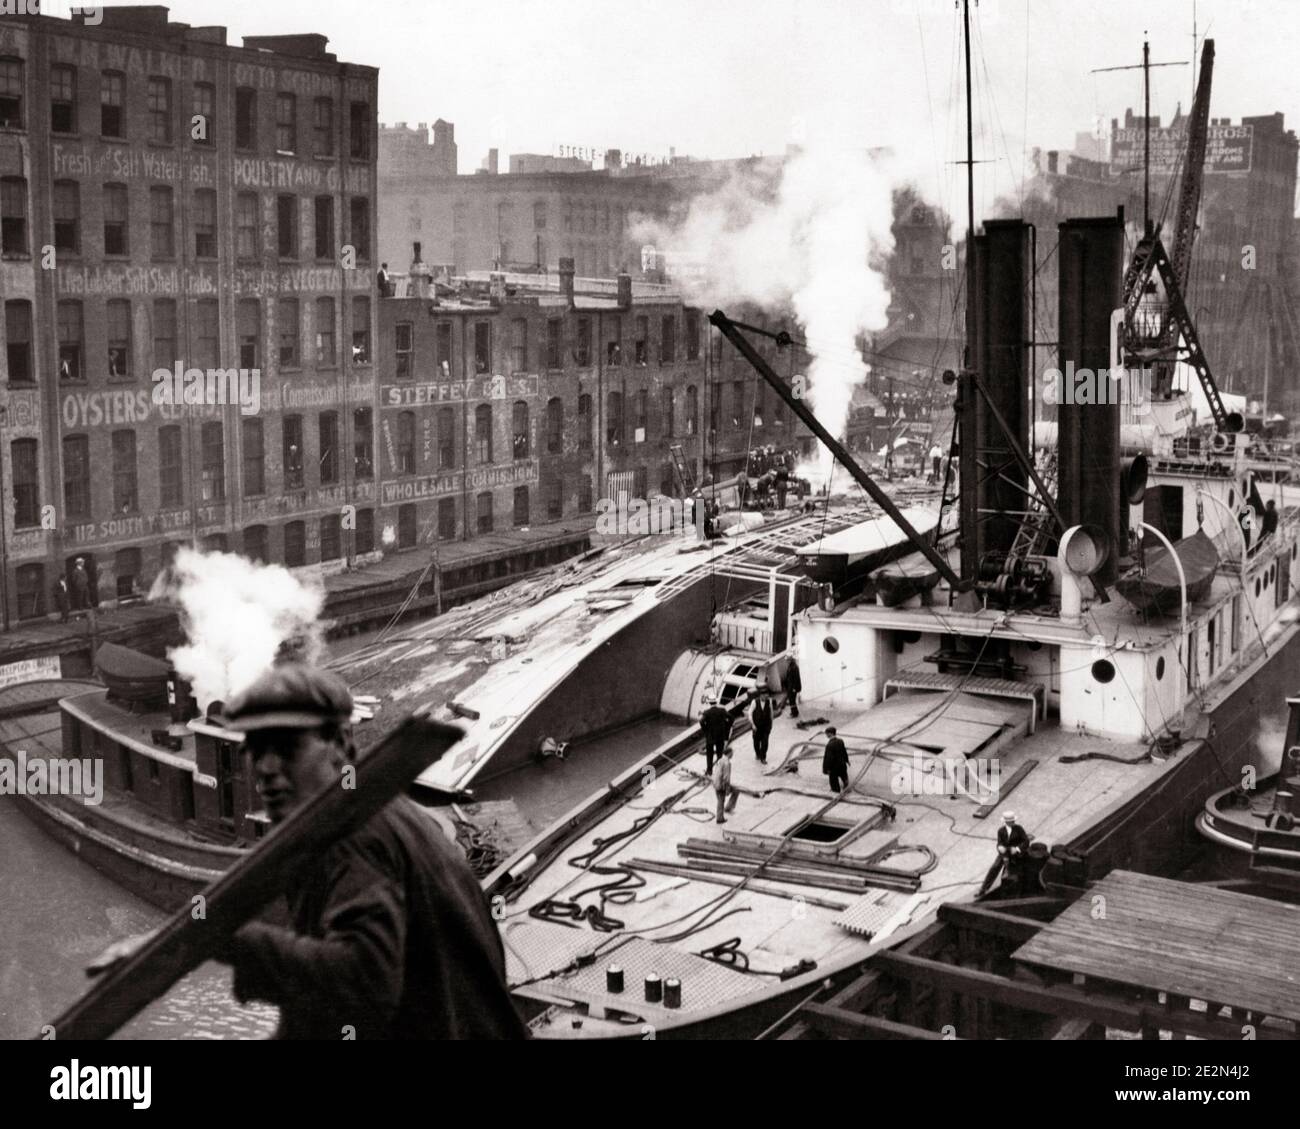 1910s THE GREAT LAKES STEAMSHIP THE EASTLAND OVERTURNED IN THE CHICAGO RIVER KILLING 812 PASSENGERS JULY 1915 CHICAGO IL USA - q75037 CPC001 HARS SUNK Stock Photo